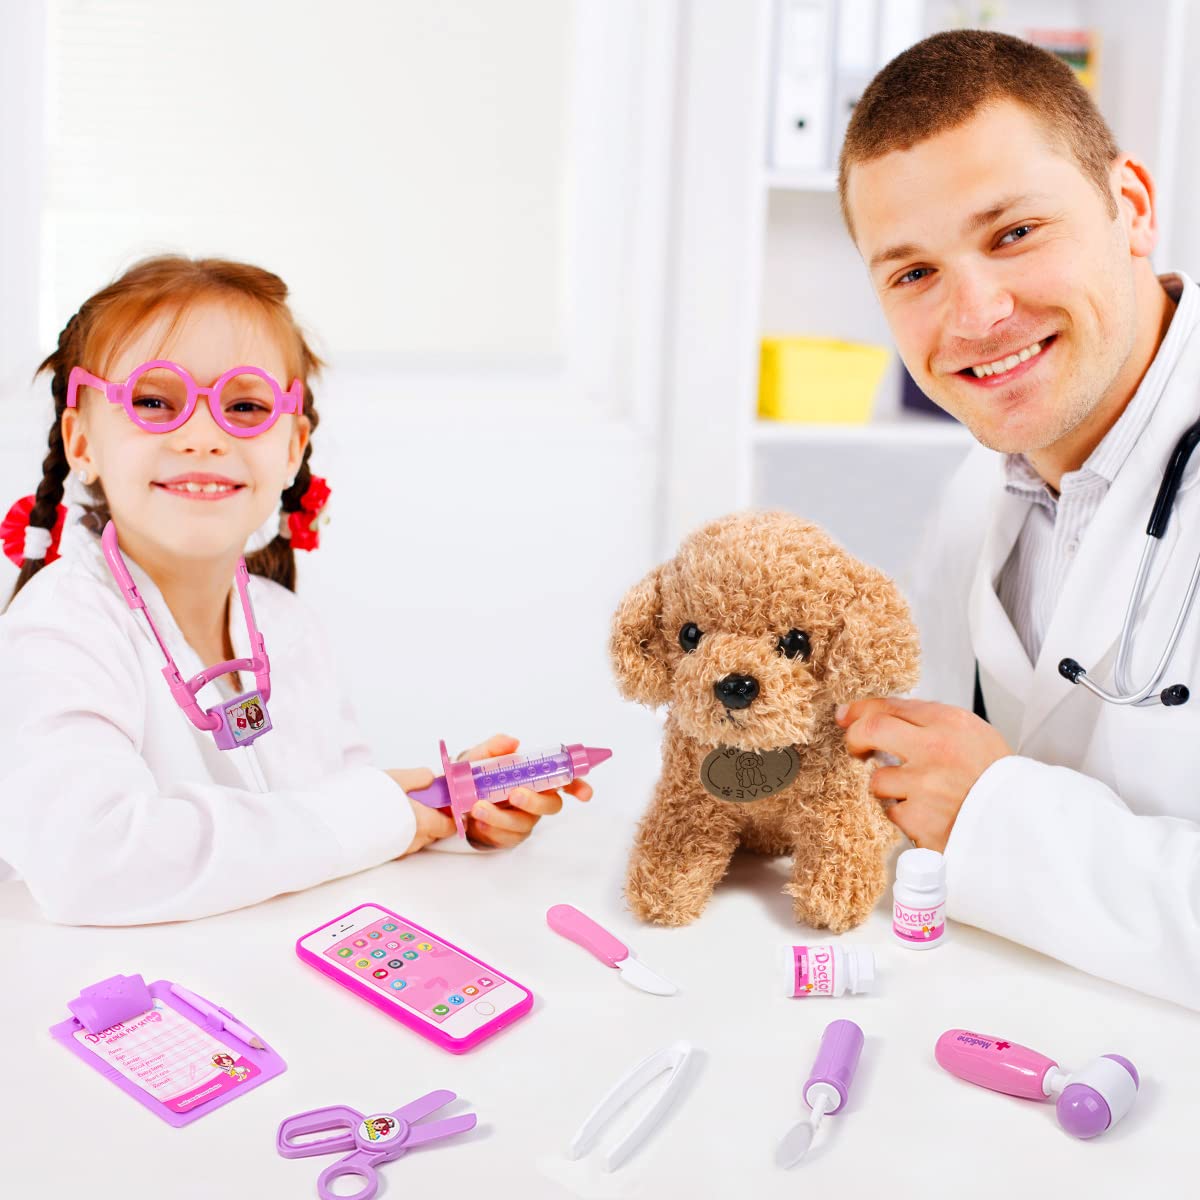 Meland Toy Doctor Kit for Girls - Pretend Play Doctor Set with Dog Toy, Carrying Bag, Electronic Stethoscope & Dress Up Costume - Doctor Play Gift for Kids Toddlers Ages 3 4 5 6 Year Old for Role Play